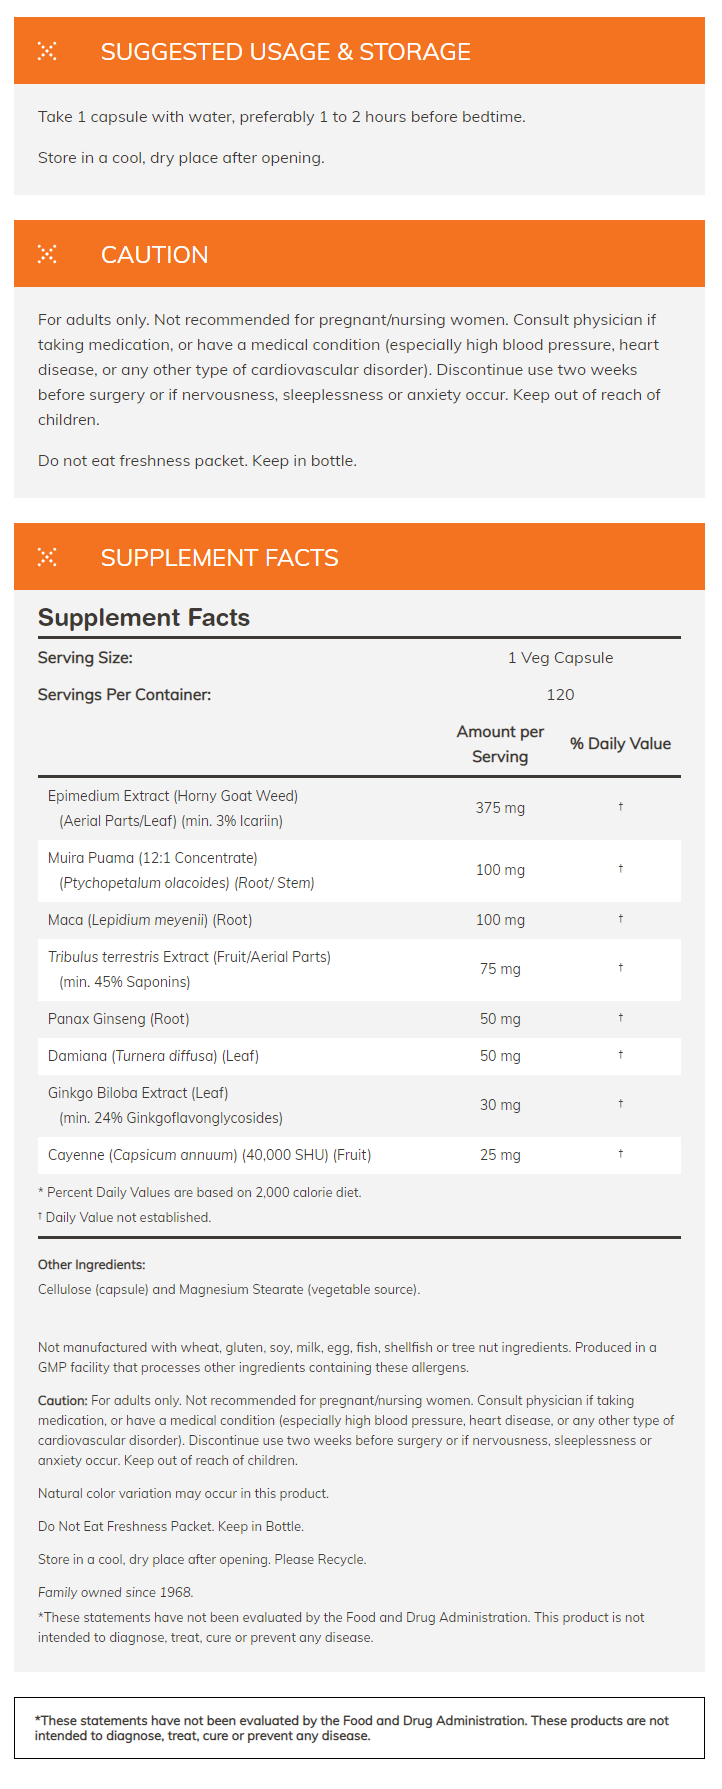 Supplement capsule instructions and ingredients list including Horny Goat Weed, Maca, Tribulus terrestris, Ginseng, and more. Not for pregnant/nursing women or those with medical conditions.